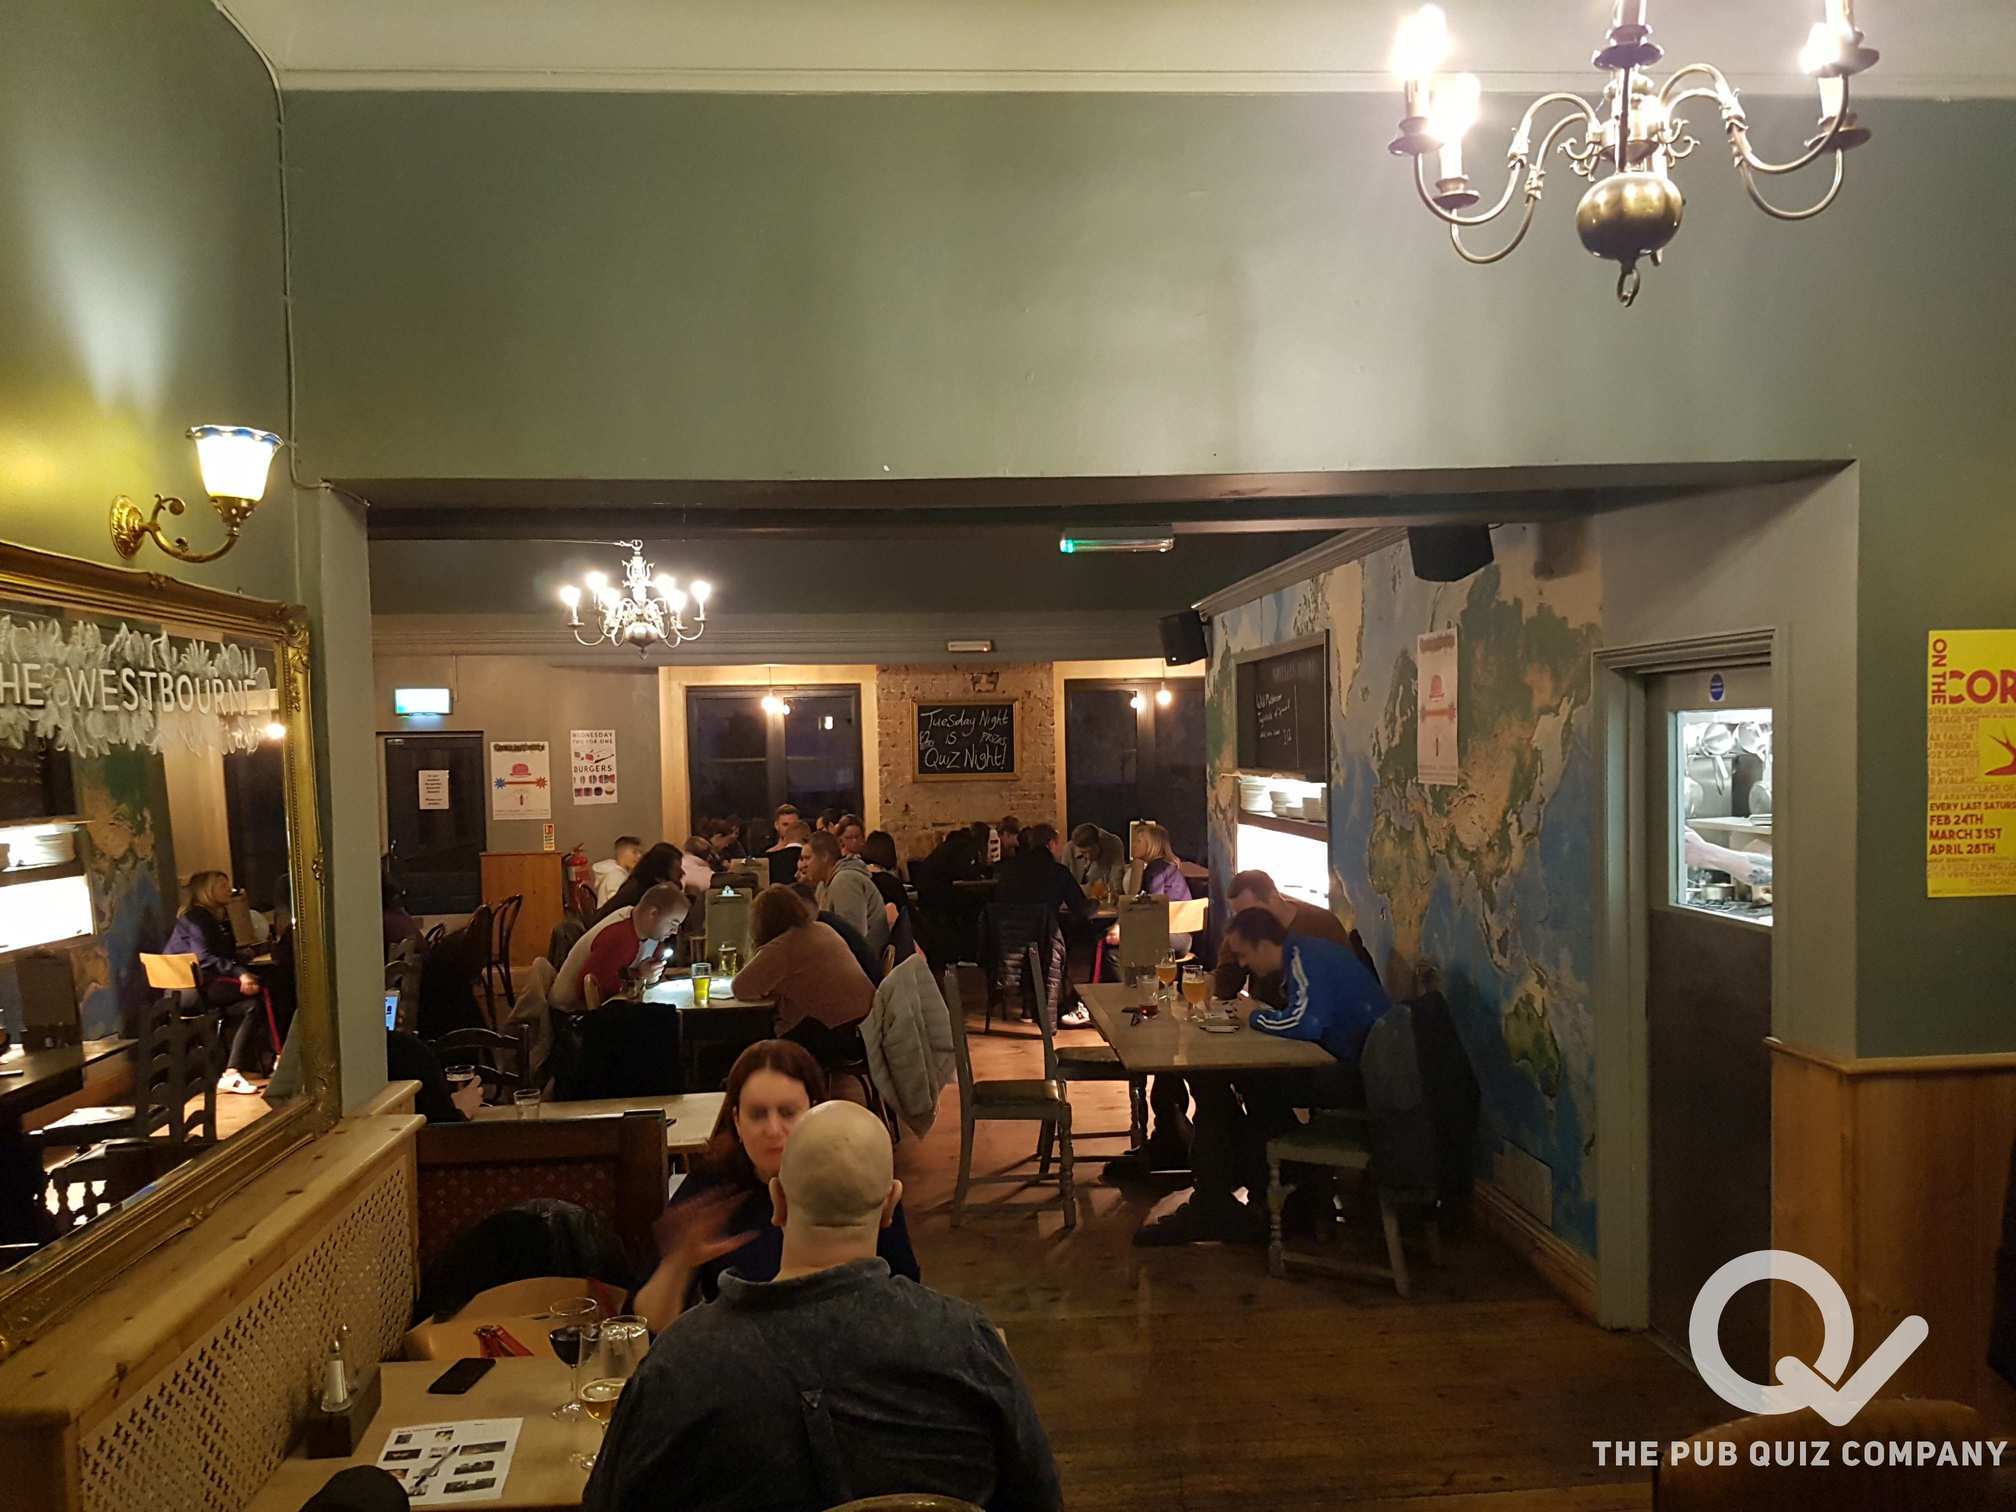 The Westbourne - Tuesday 27th March 2018